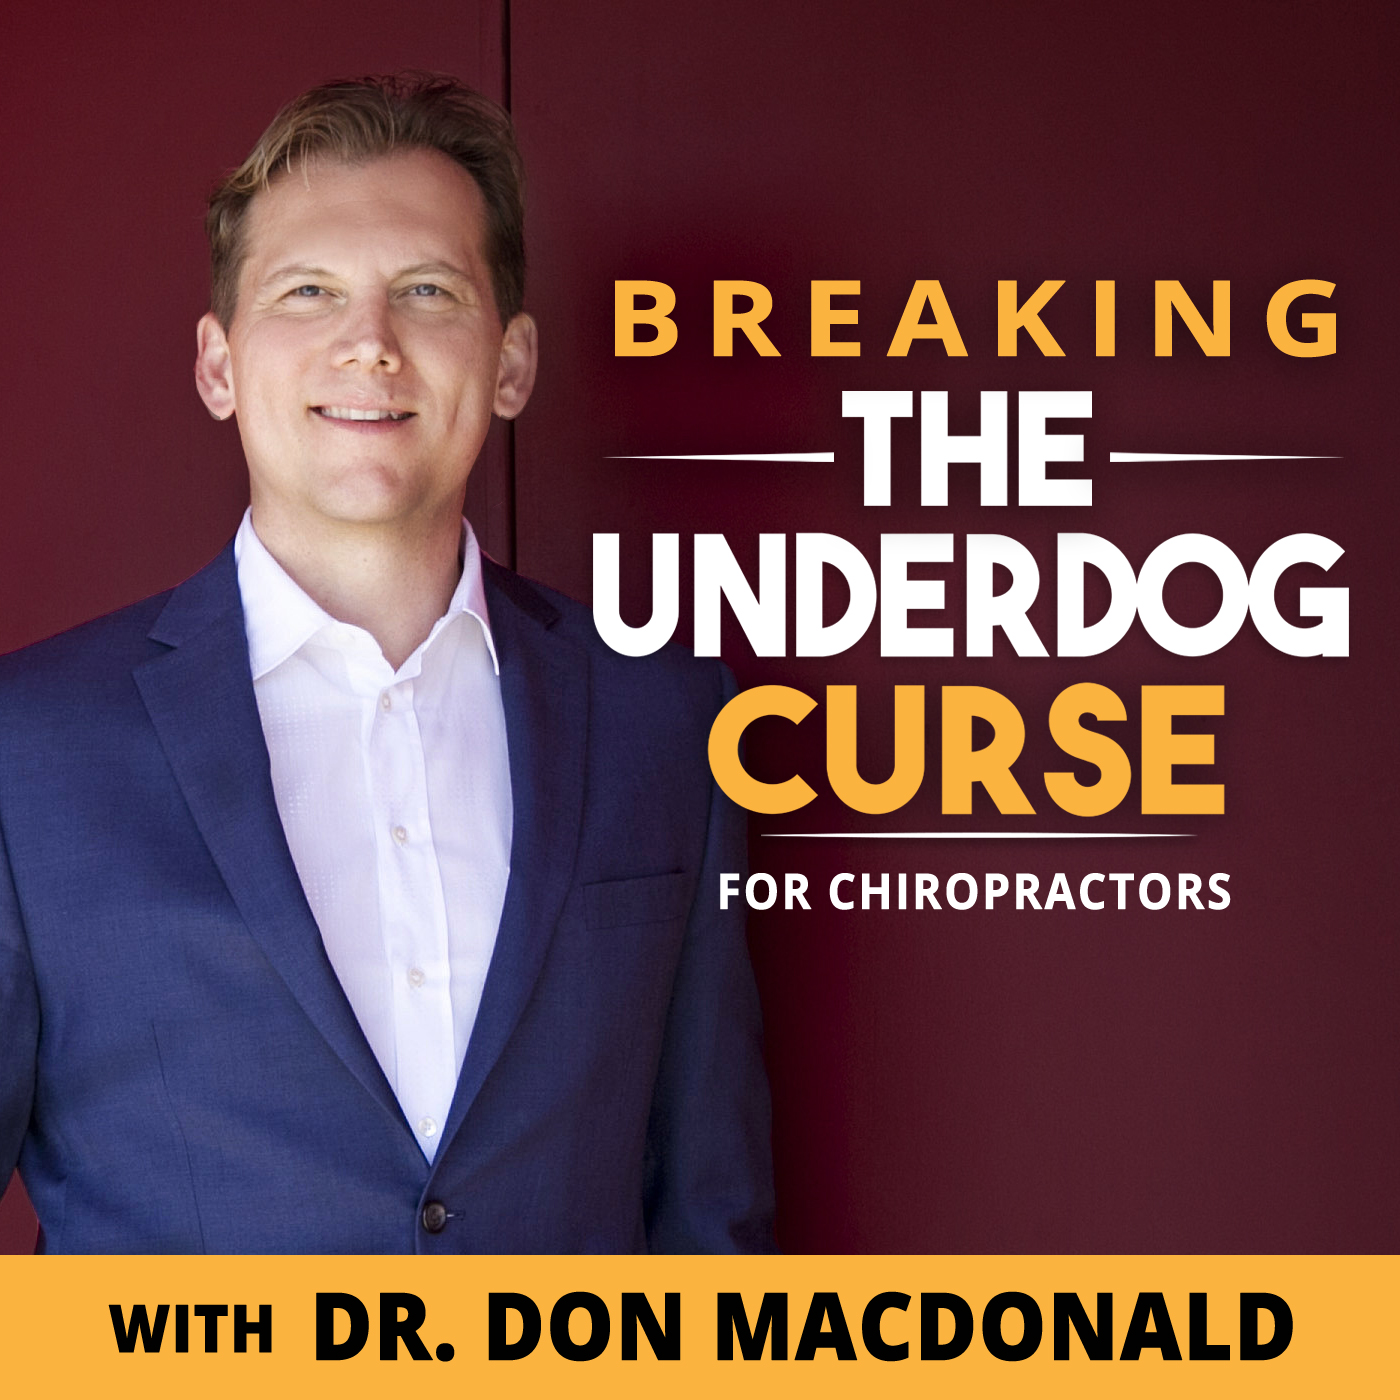 Create The Shift Towards Vitalistic Chiropractic - Dr. Marc Hudson